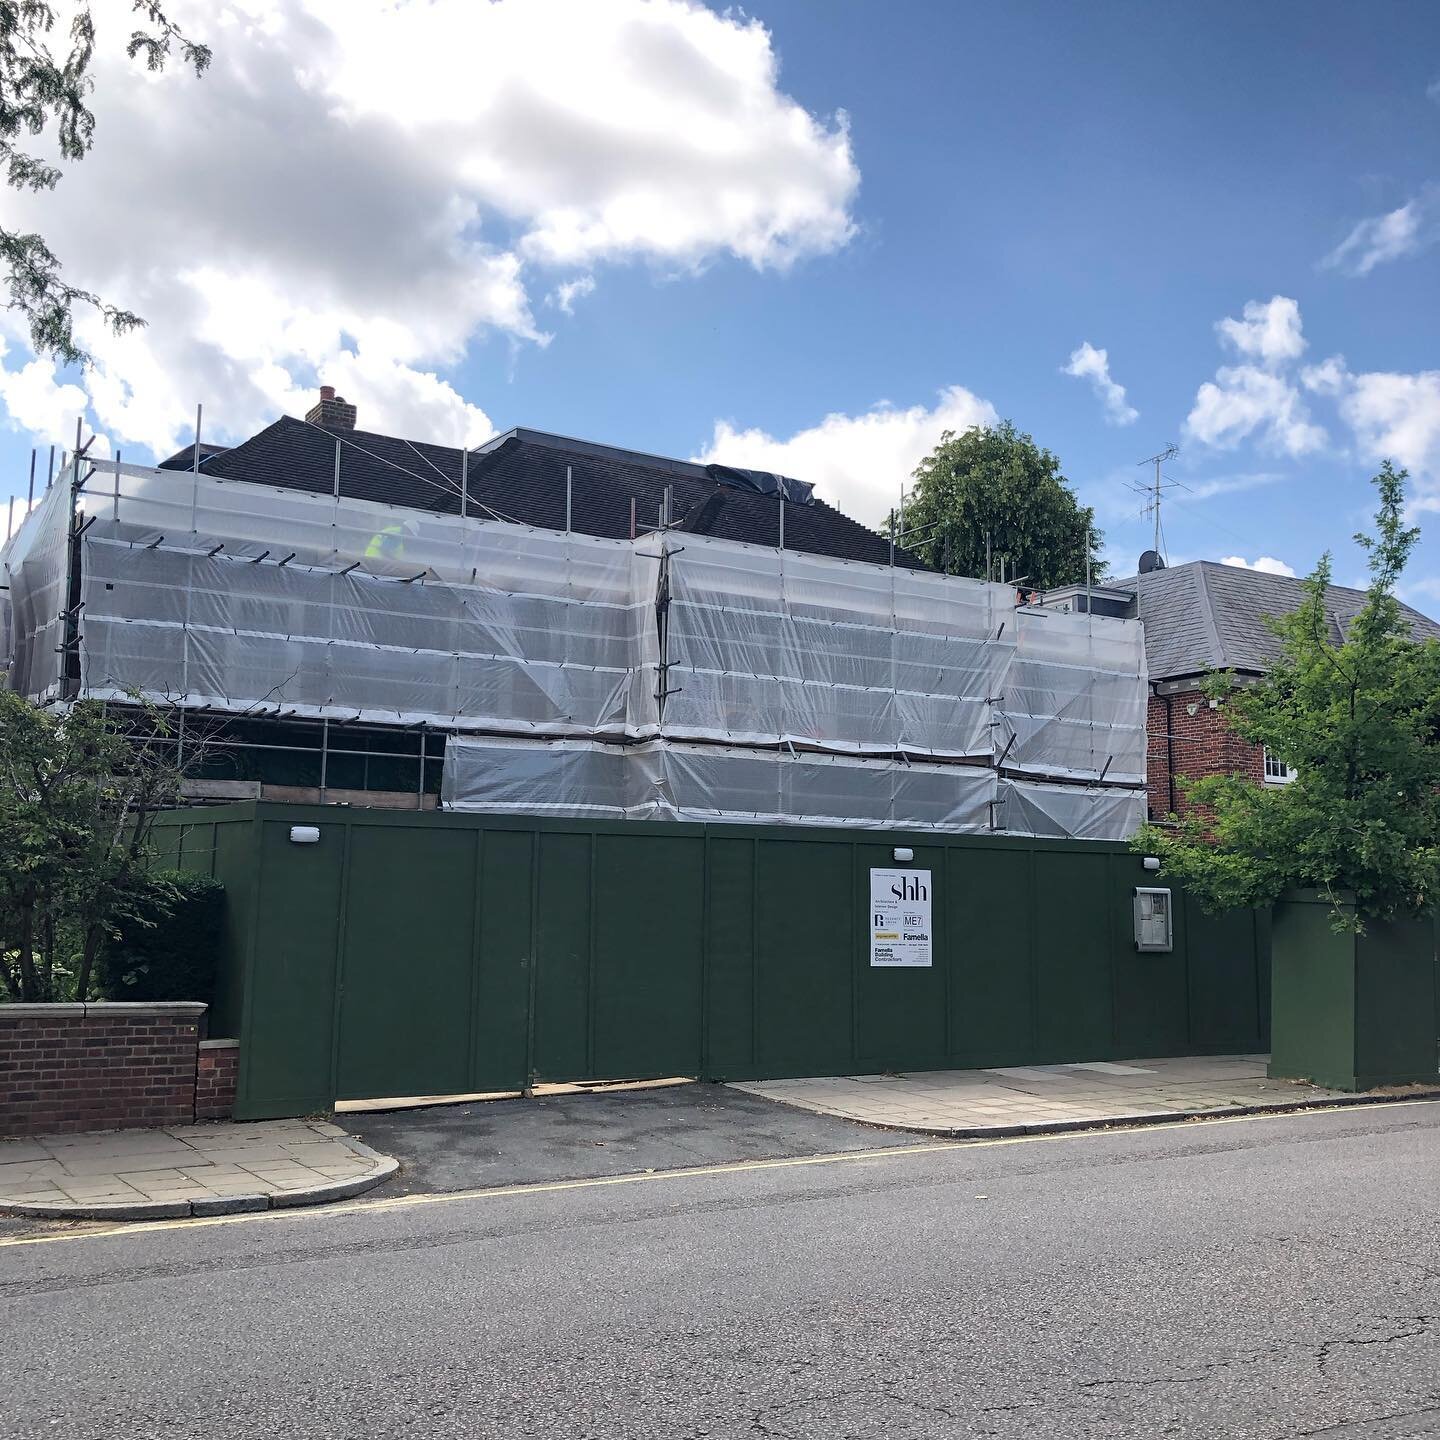 Works begin at our intricate North London project for @famellabuildingcontractors.

#mane #maneelectrical #electrical  #phoslighting #famellabuildingcontractors